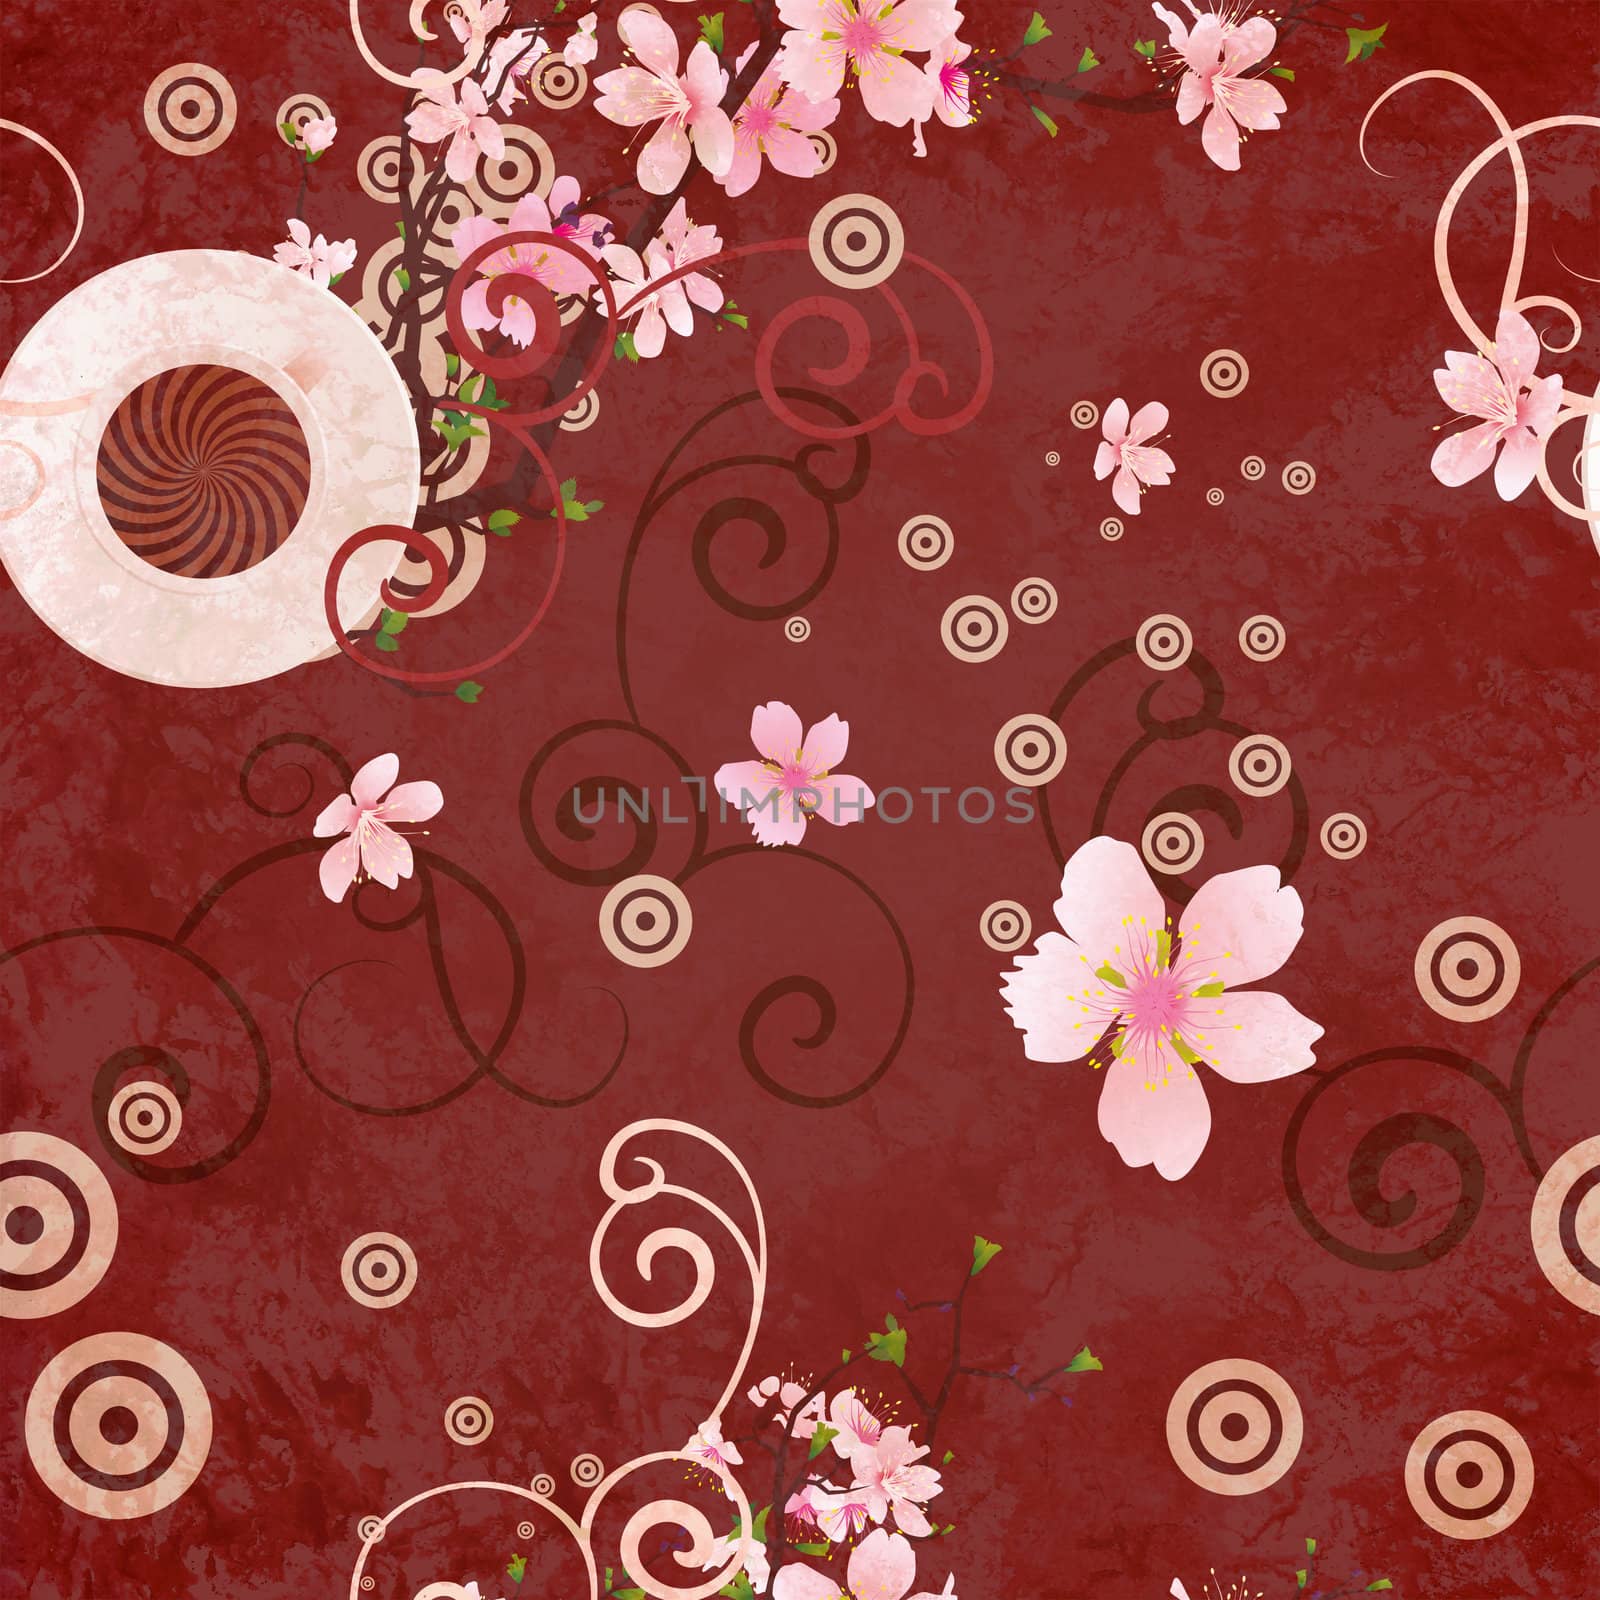 coffee cup, blooming tree branches: spring coffee brown background